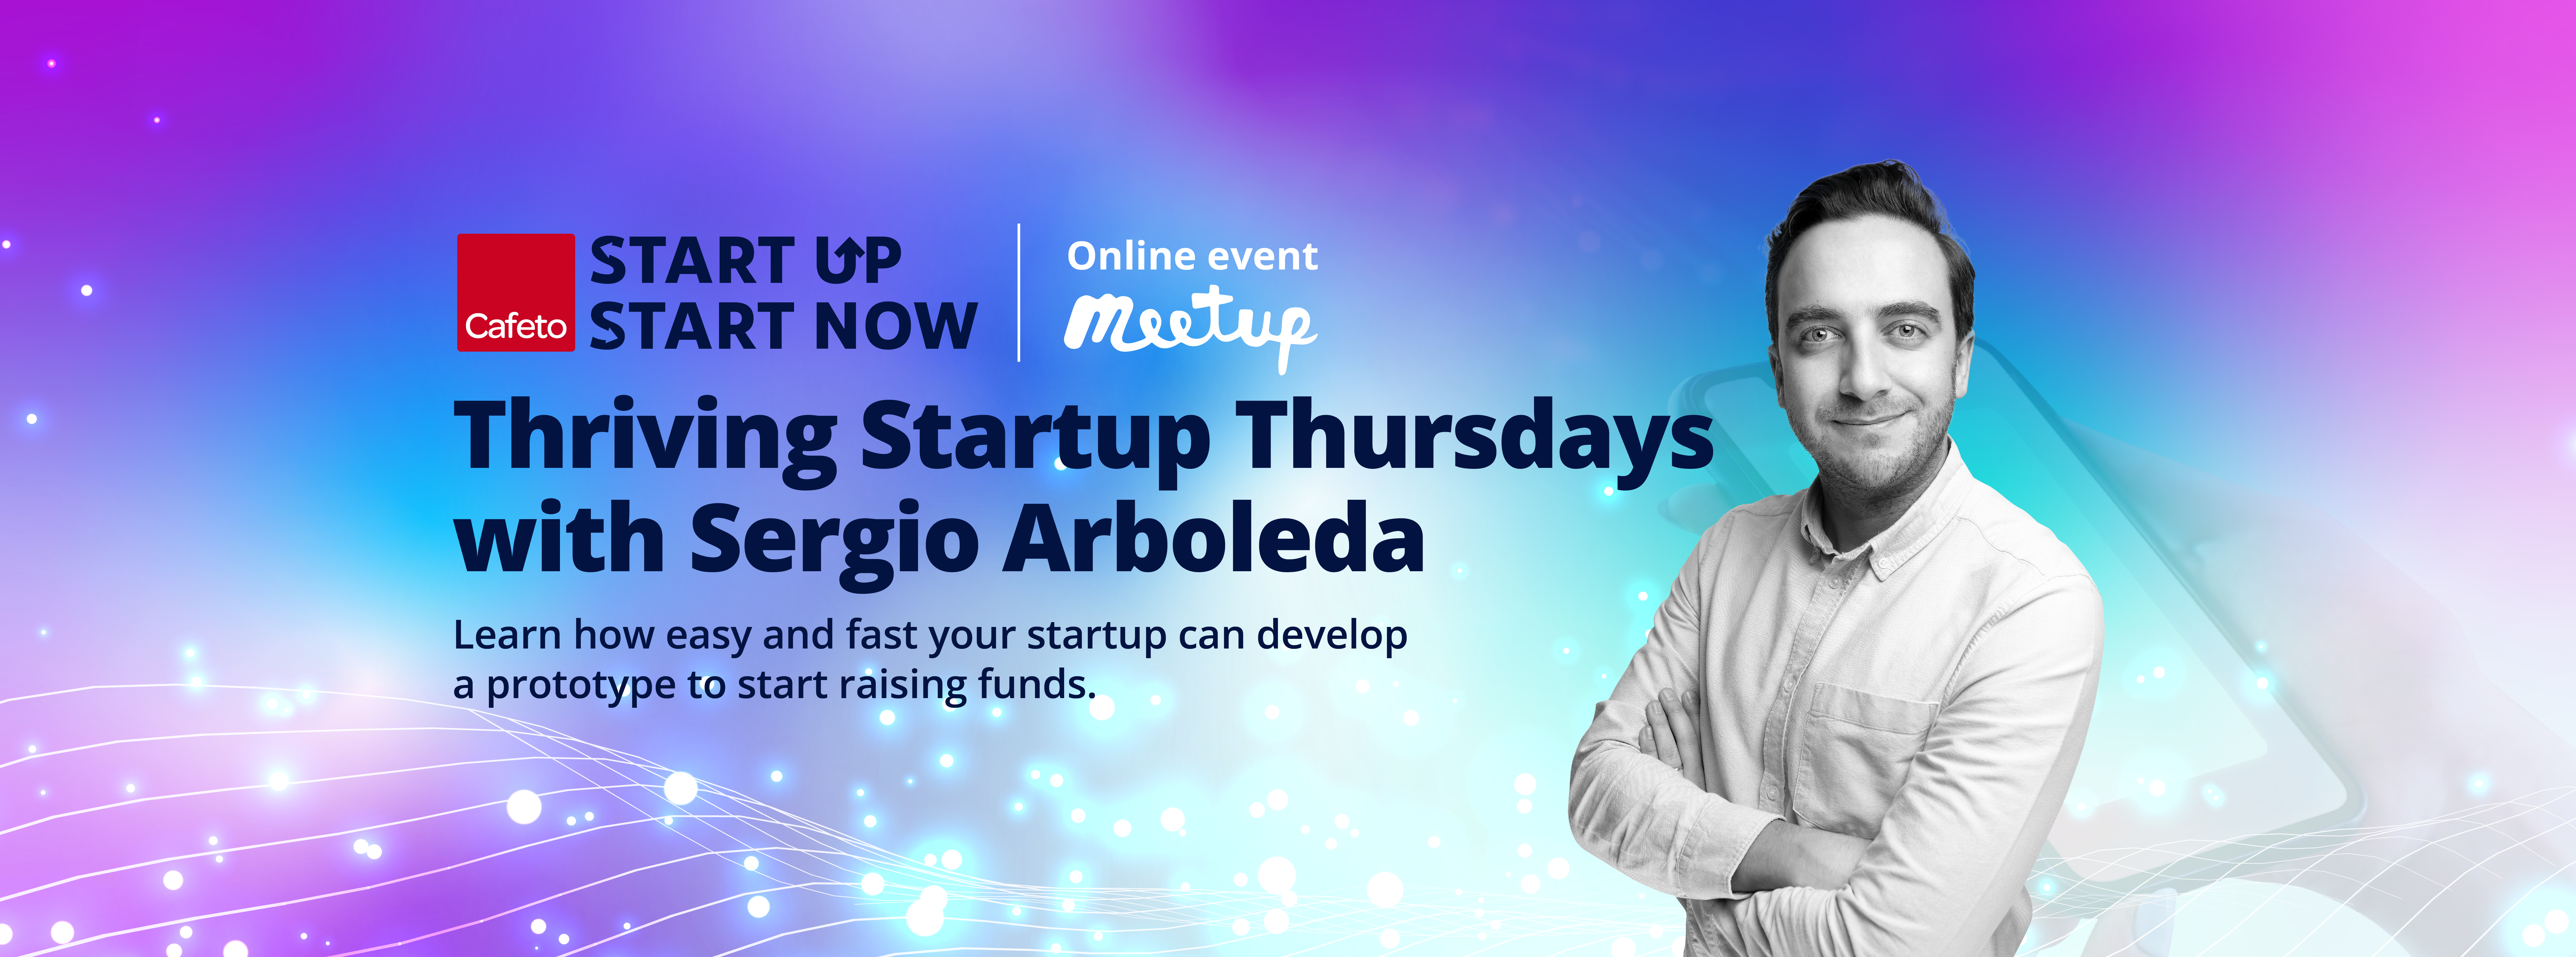 Thriving Startup Thursdays with Sergio